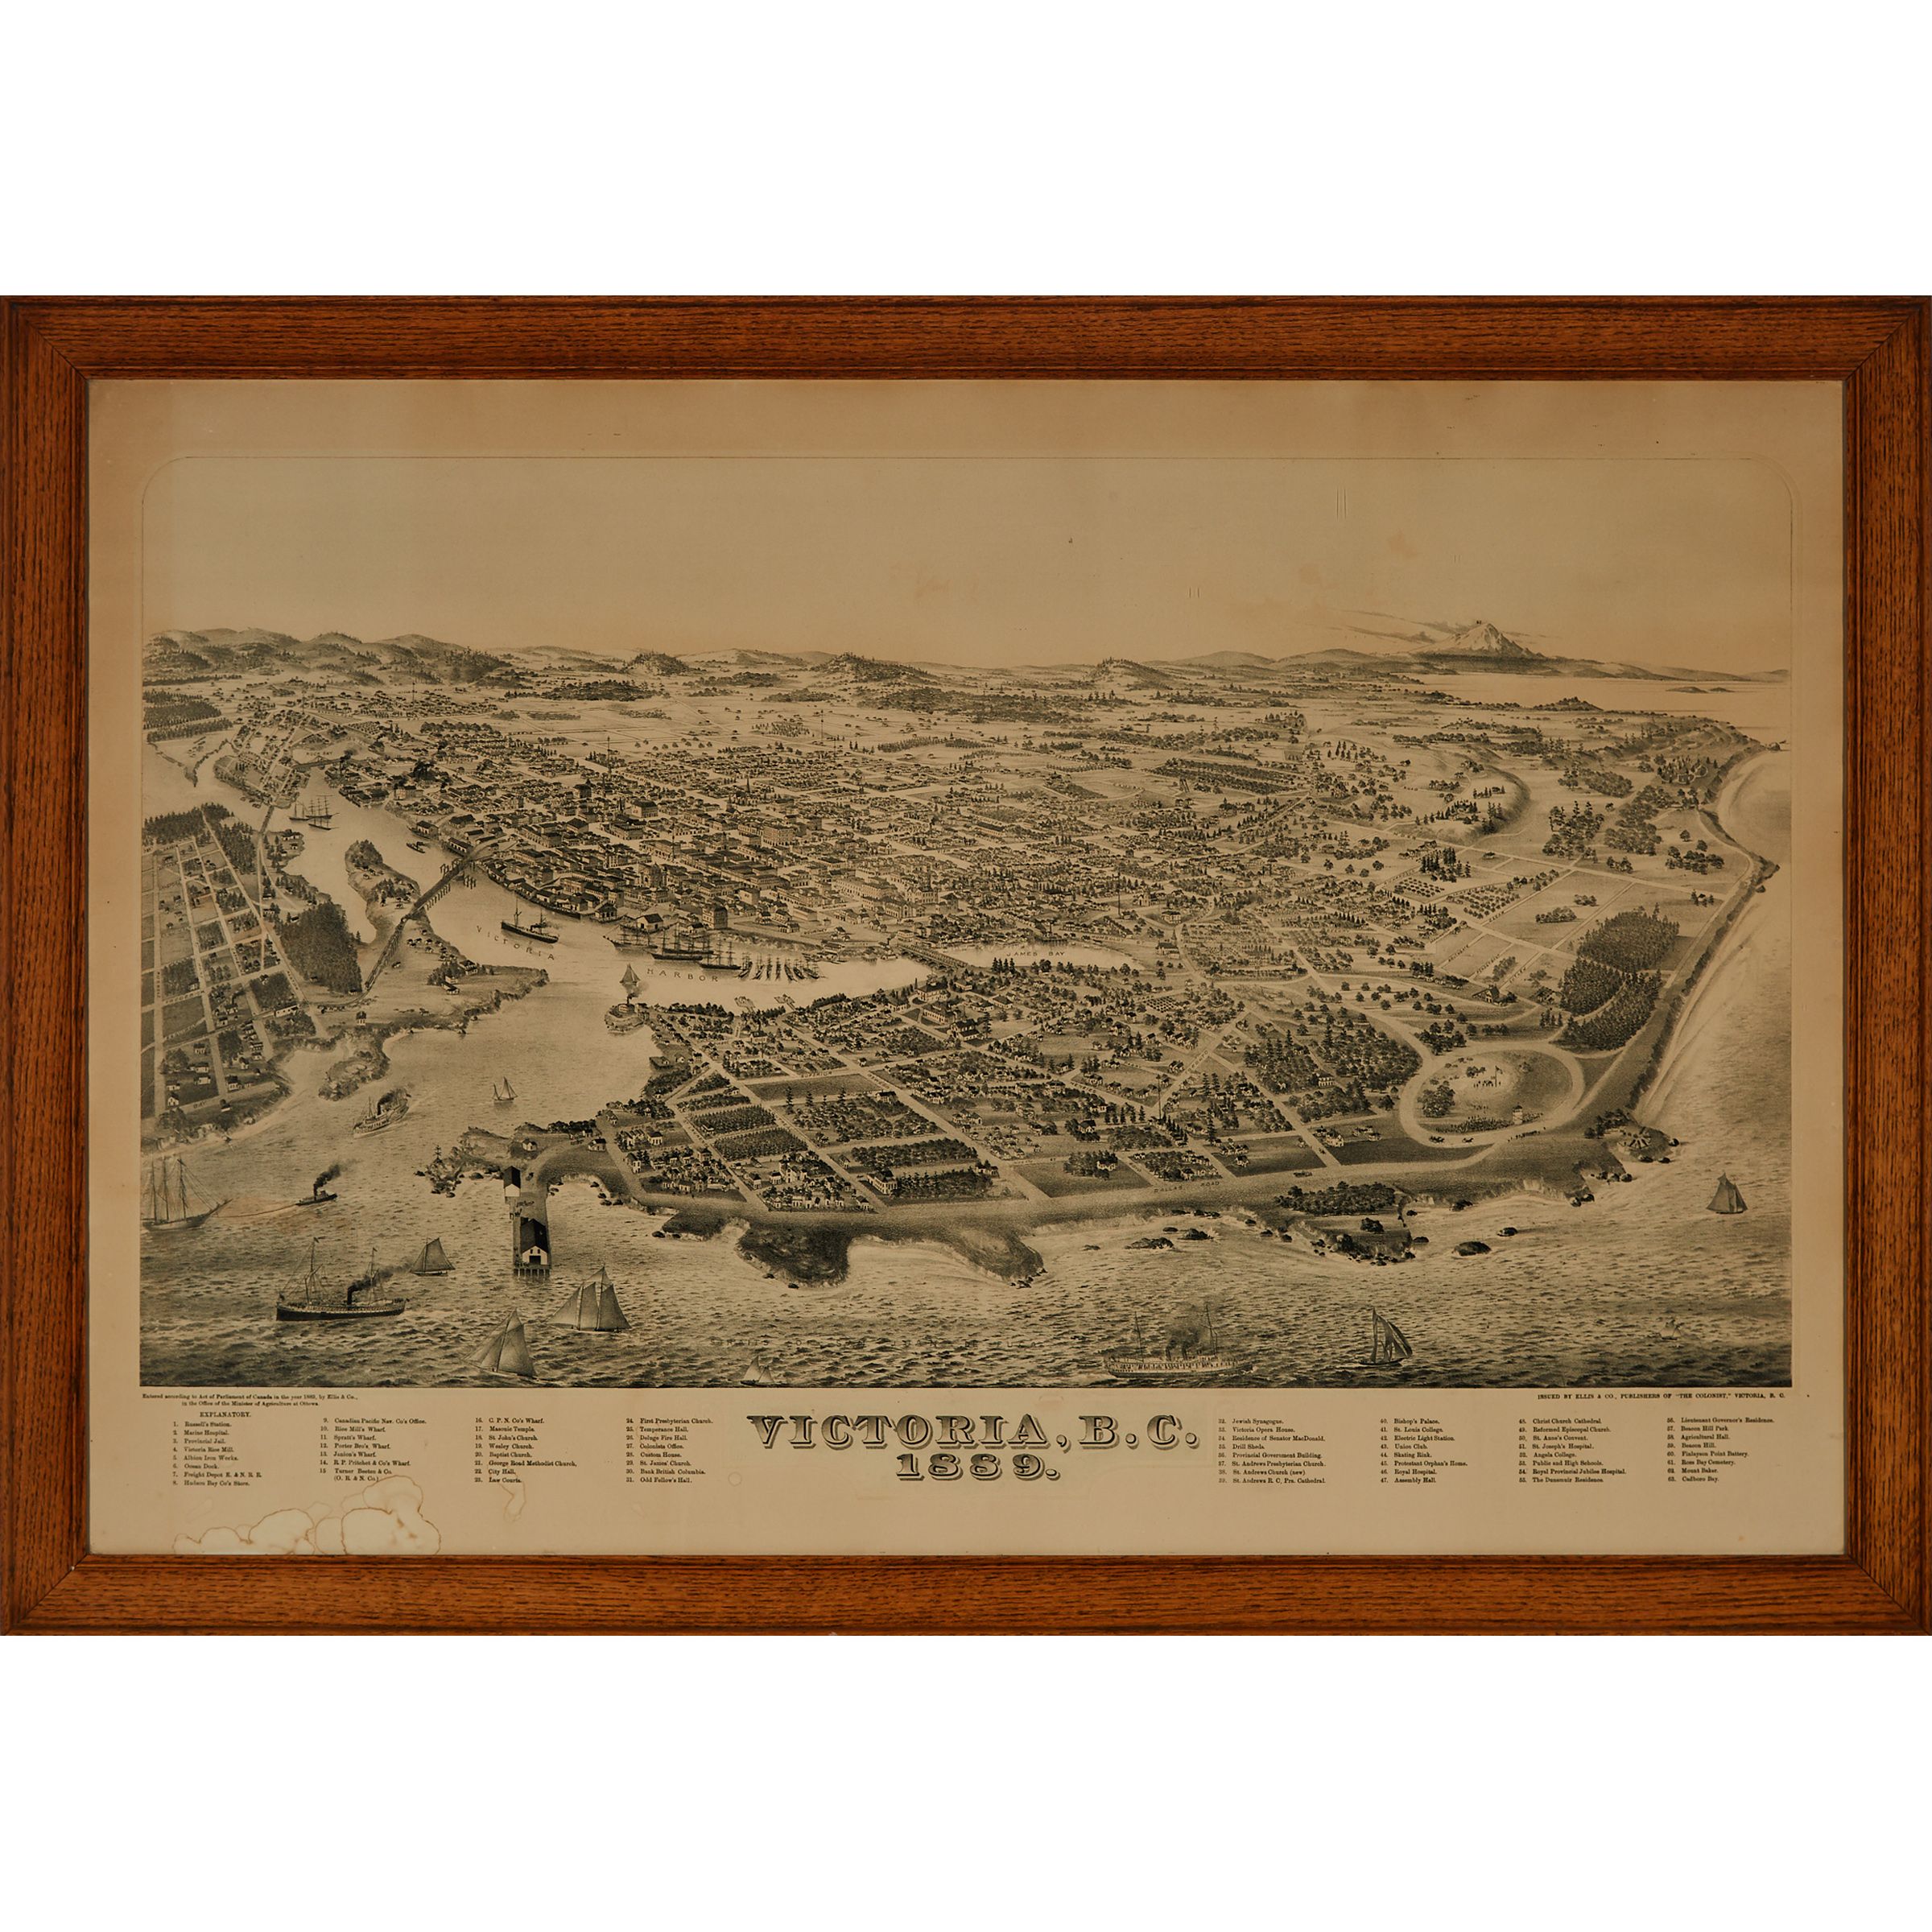 Topographical Engraving of Victoria, B.C., 1889